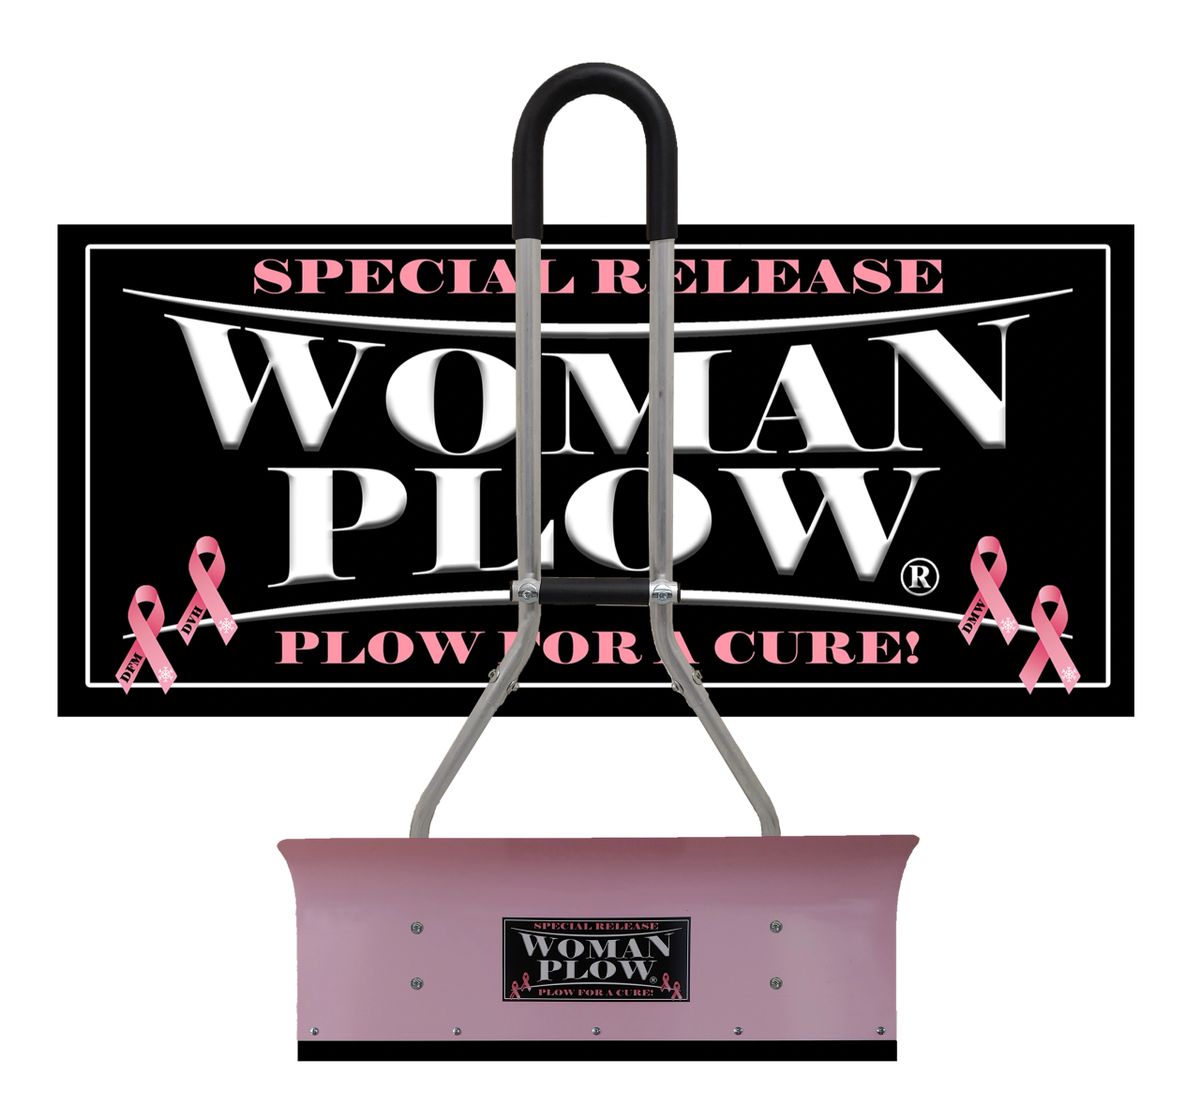 MANPLOW PRO32 Breast Cancer Awareness Special Release on a Mantis Handle  with Grab Bar